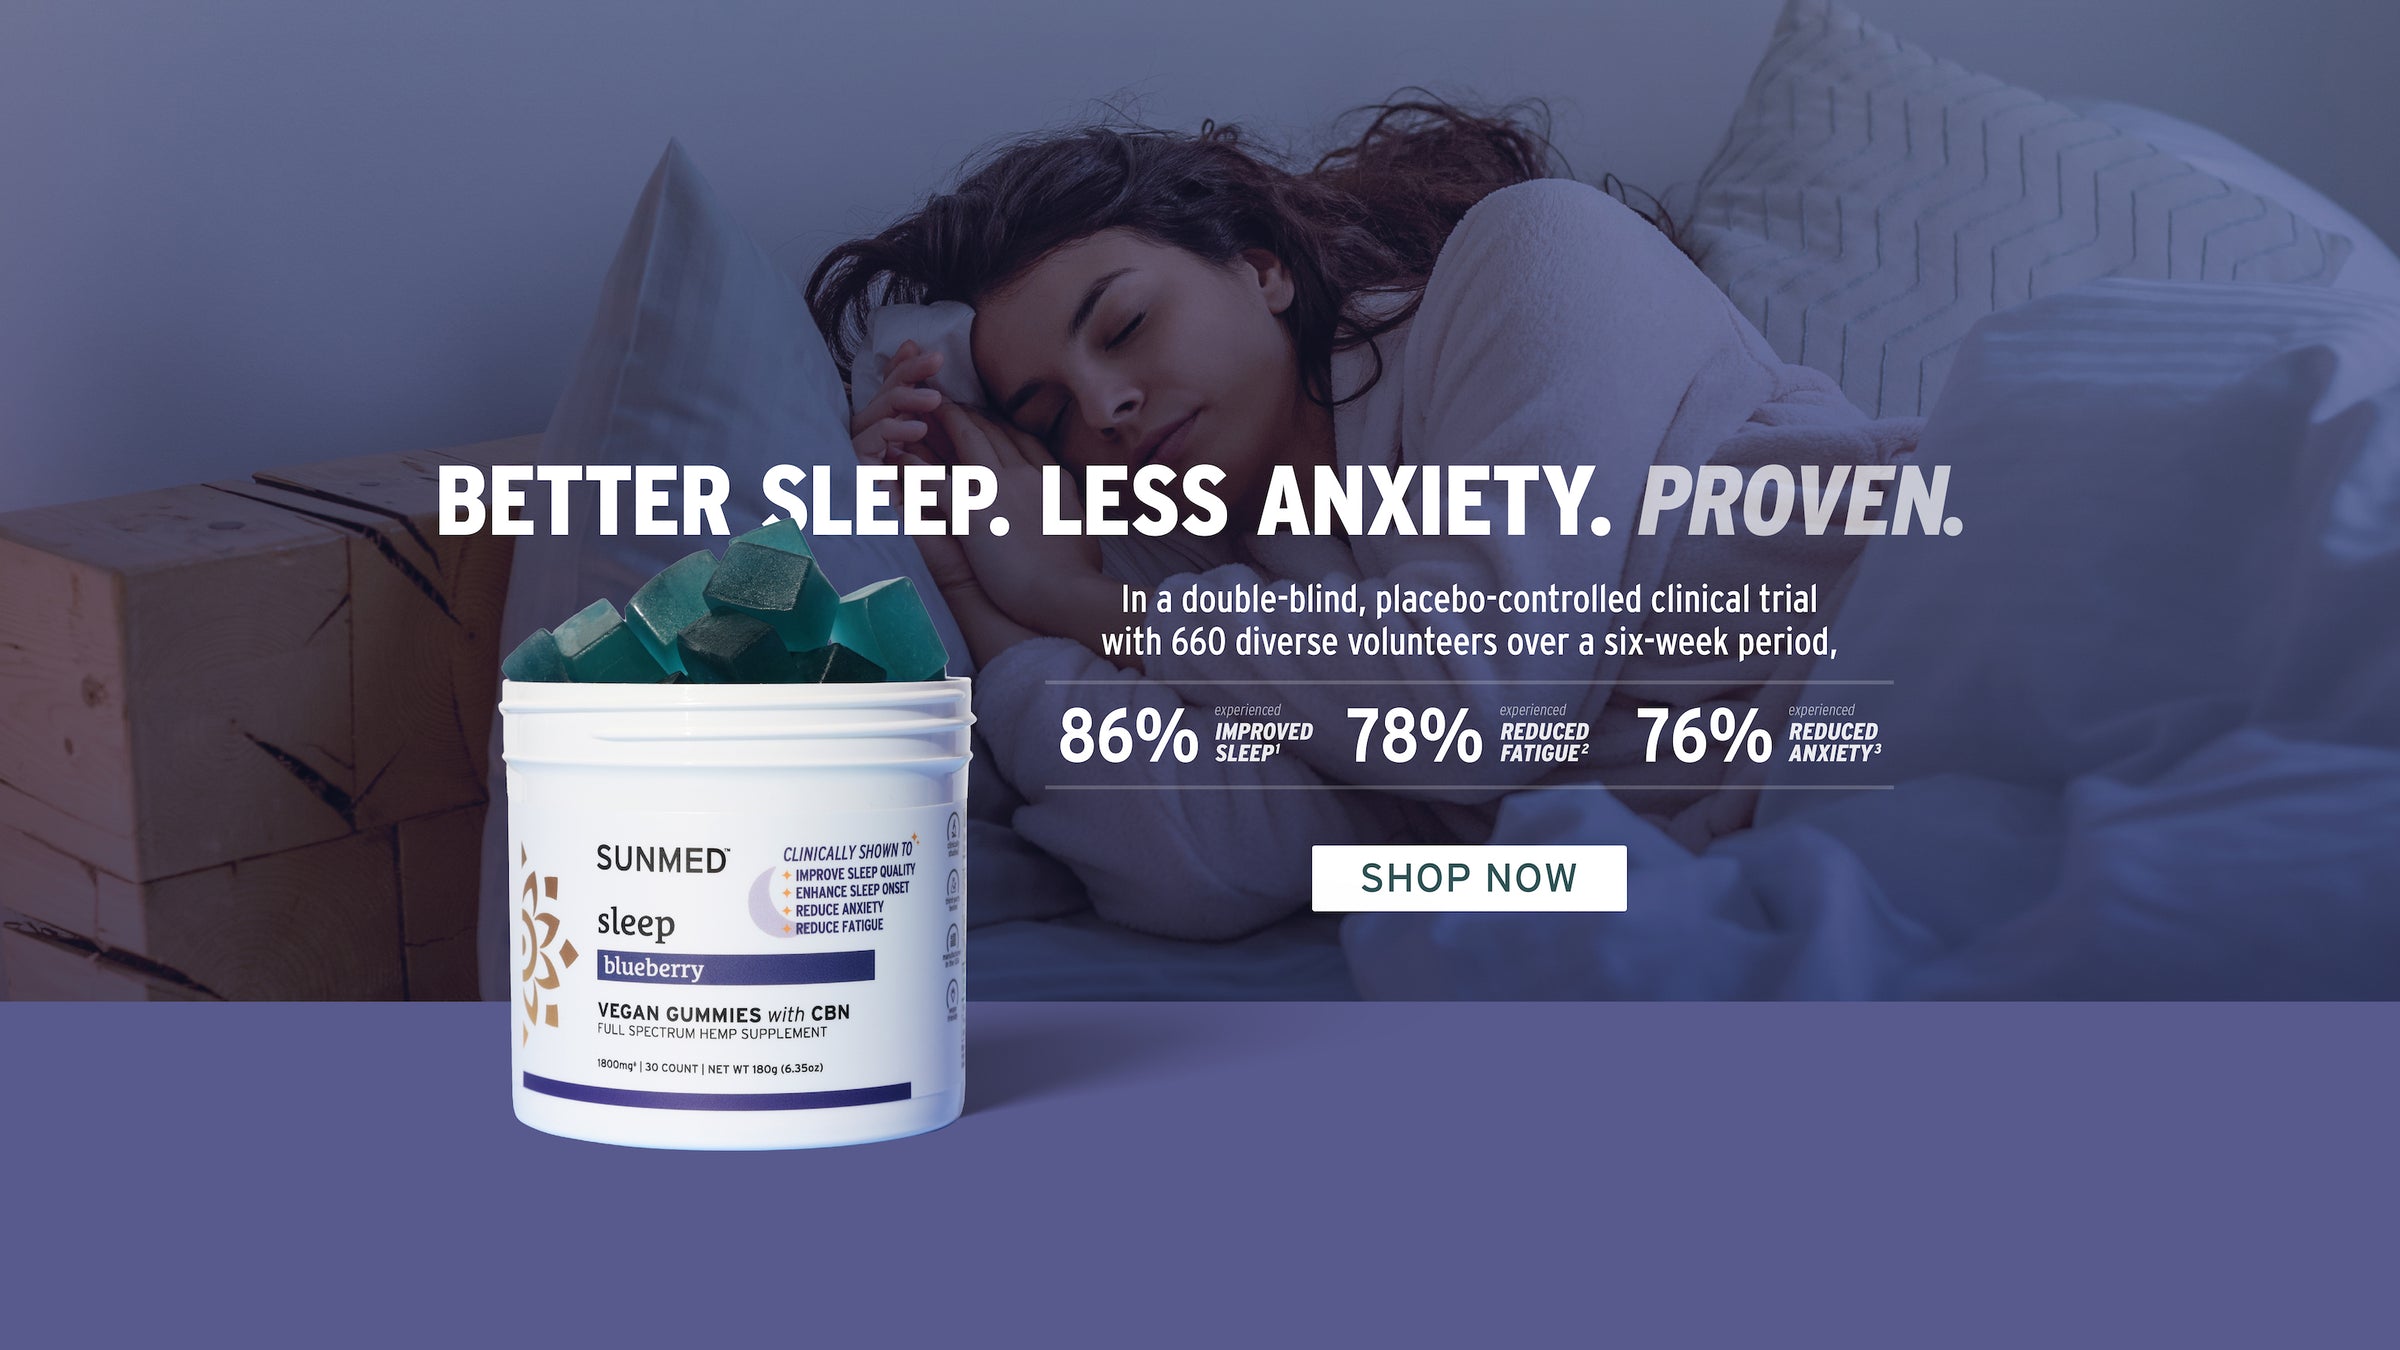 better sleep. less anxiety. proven. shop now.